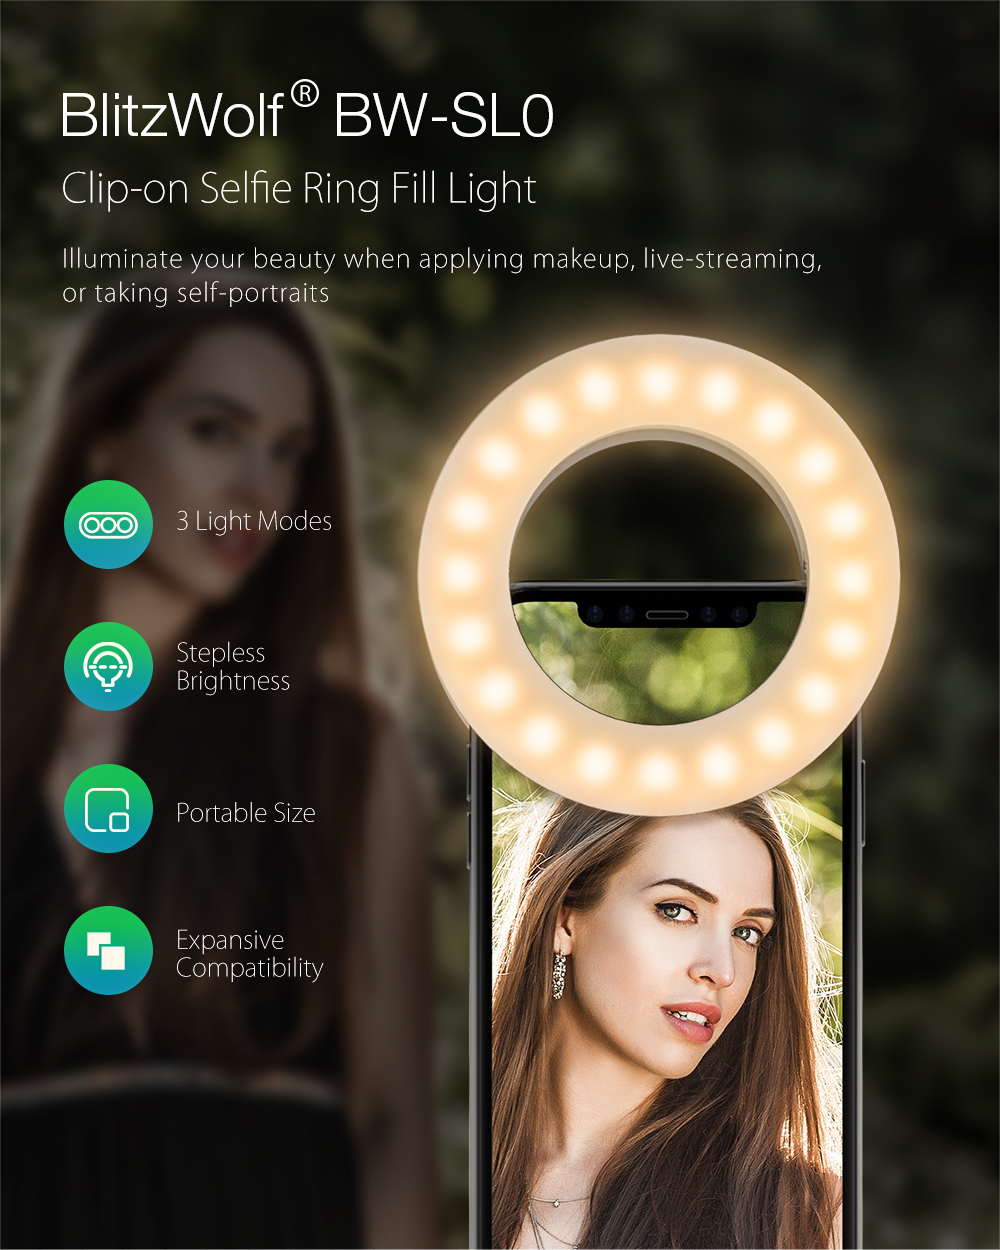 BlitzWolf® BW-SL0 LED Selfie Ring Fill Light Clip-on Beauty Rechargeable Light for Cell Phones Photo Video